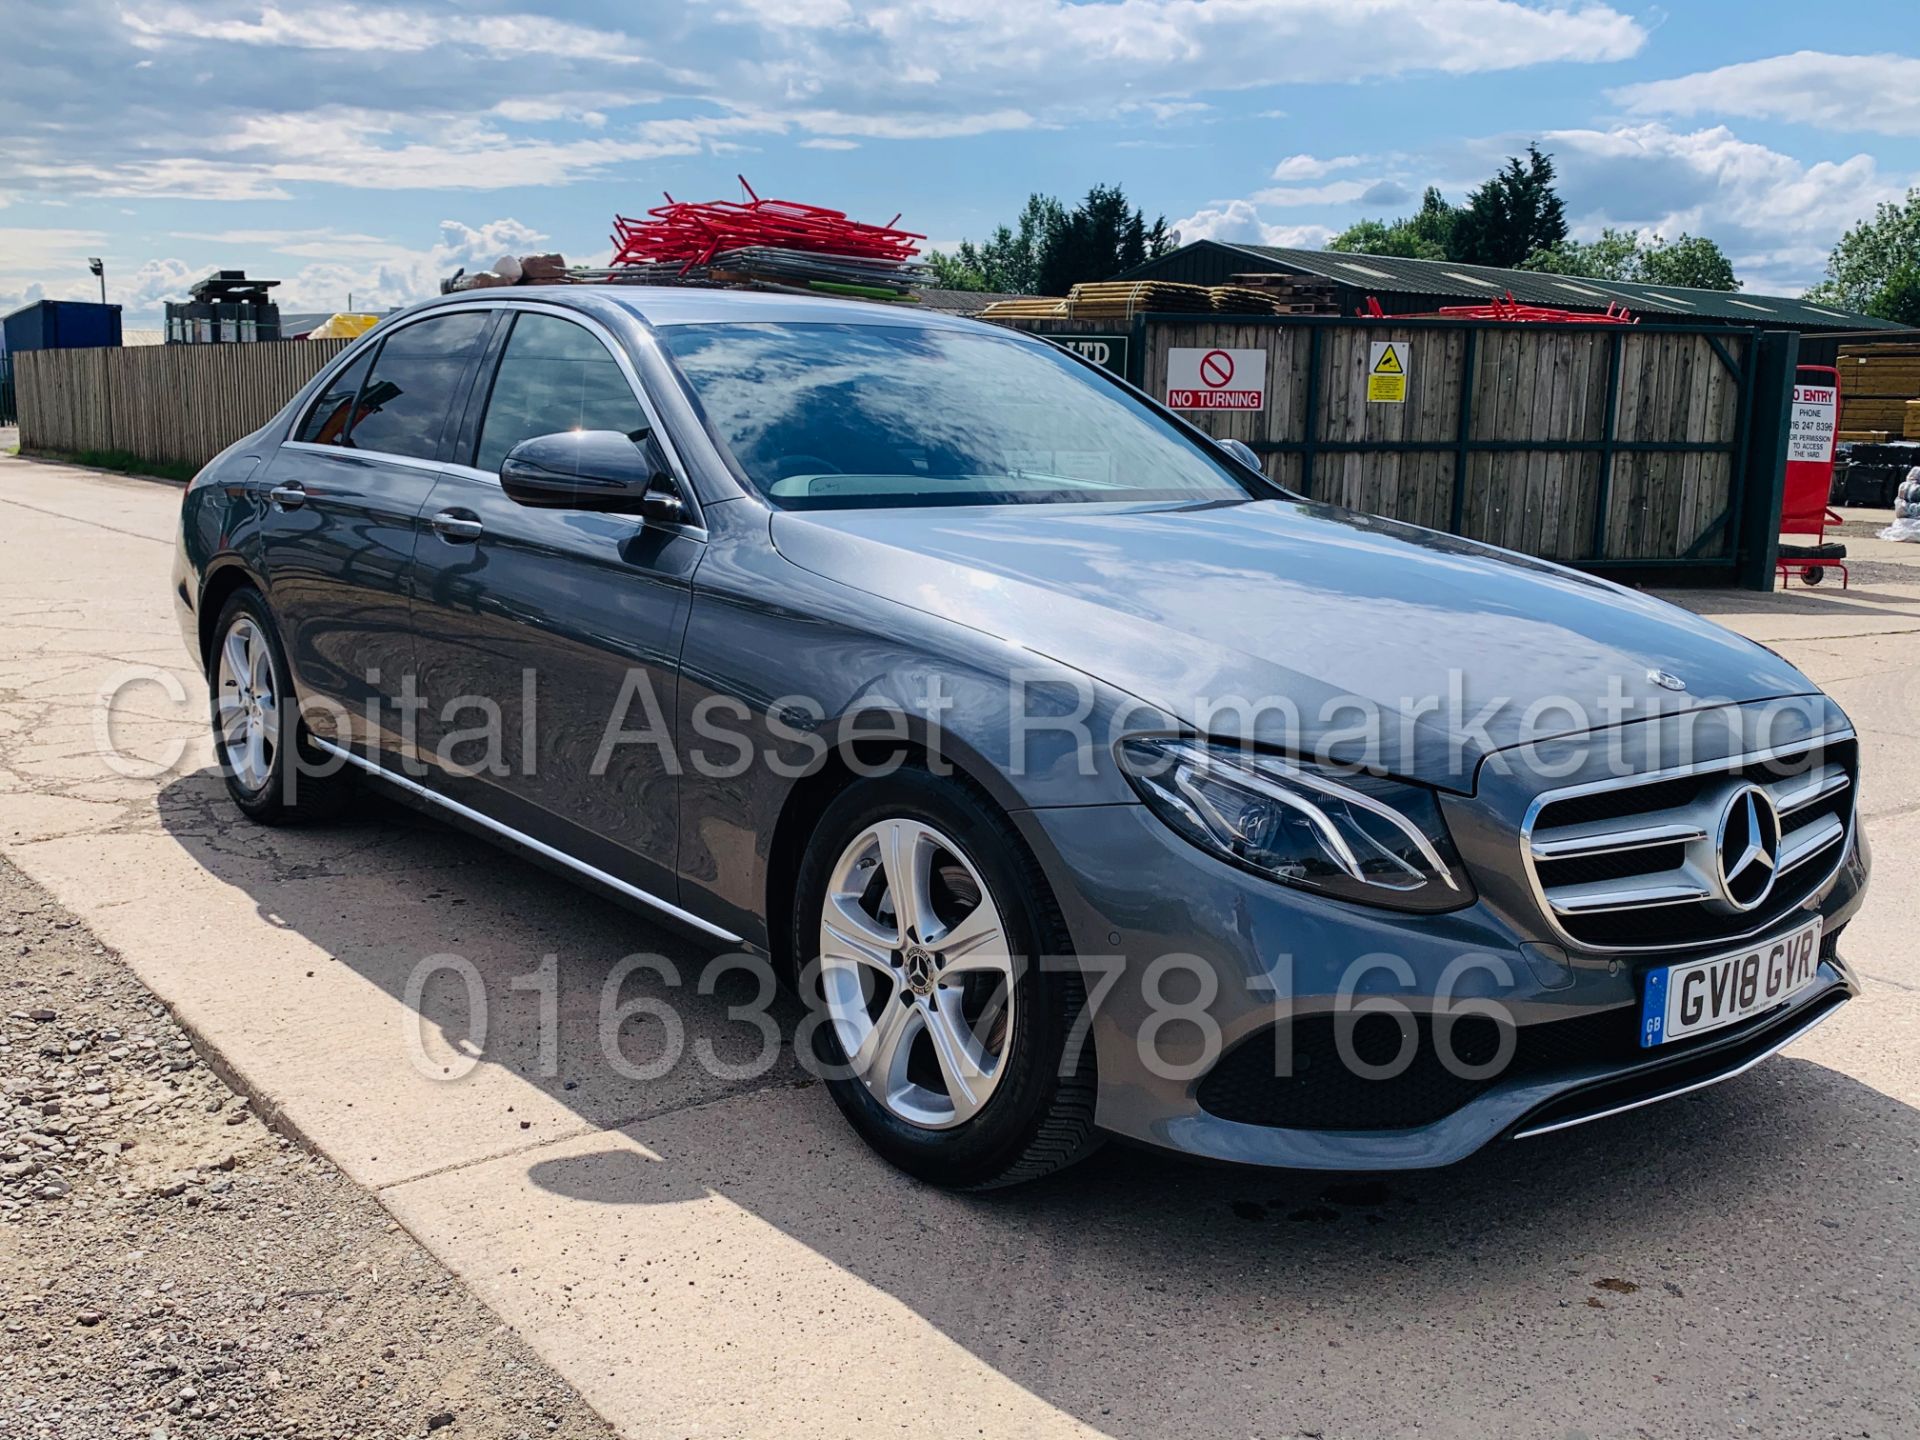 (On Sale) MERCEDES-BENZ E220D *SALOON* (2018 - NEW MODEL) '9-G TRONIC AUTO - LEATHER - SAT NAV' - Image 3 of 56